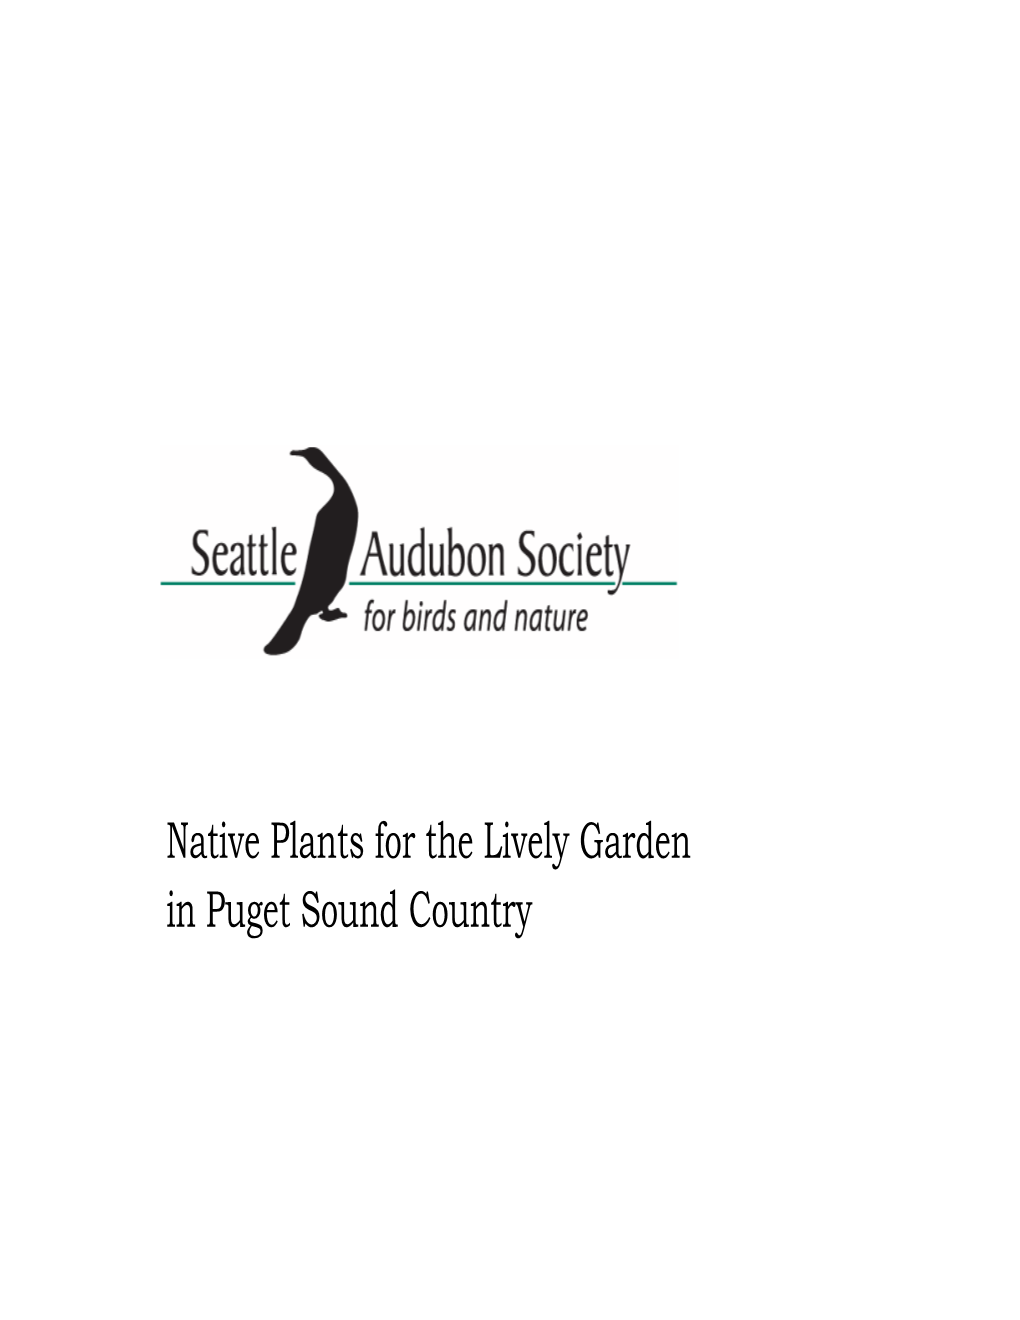 Native Plants for the Lively Garden in Puget Sound Country